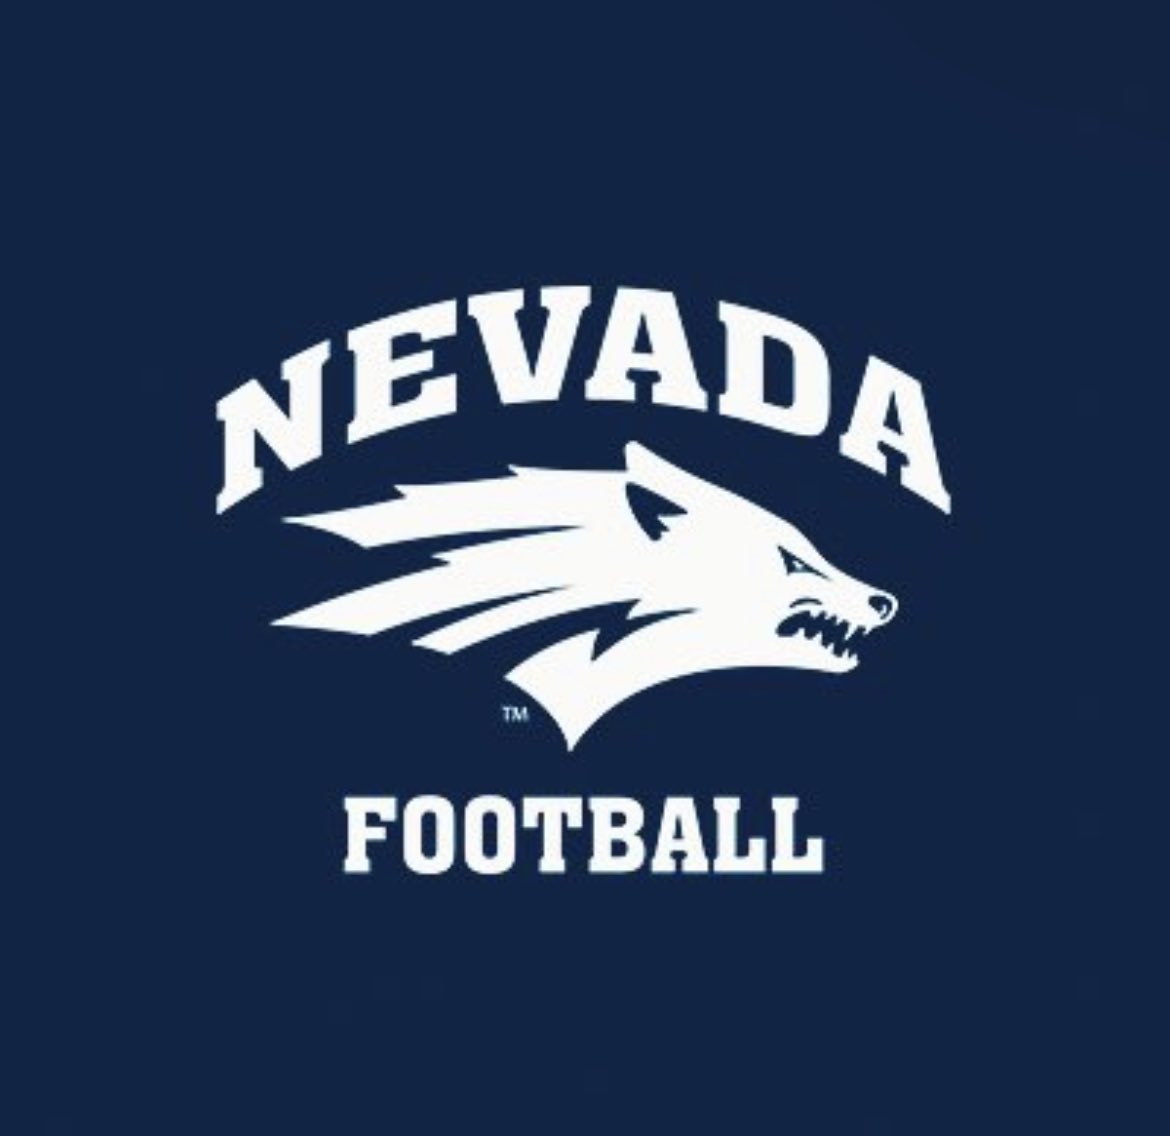 Blessed to receive an offer from the University of Nevada #AGTG